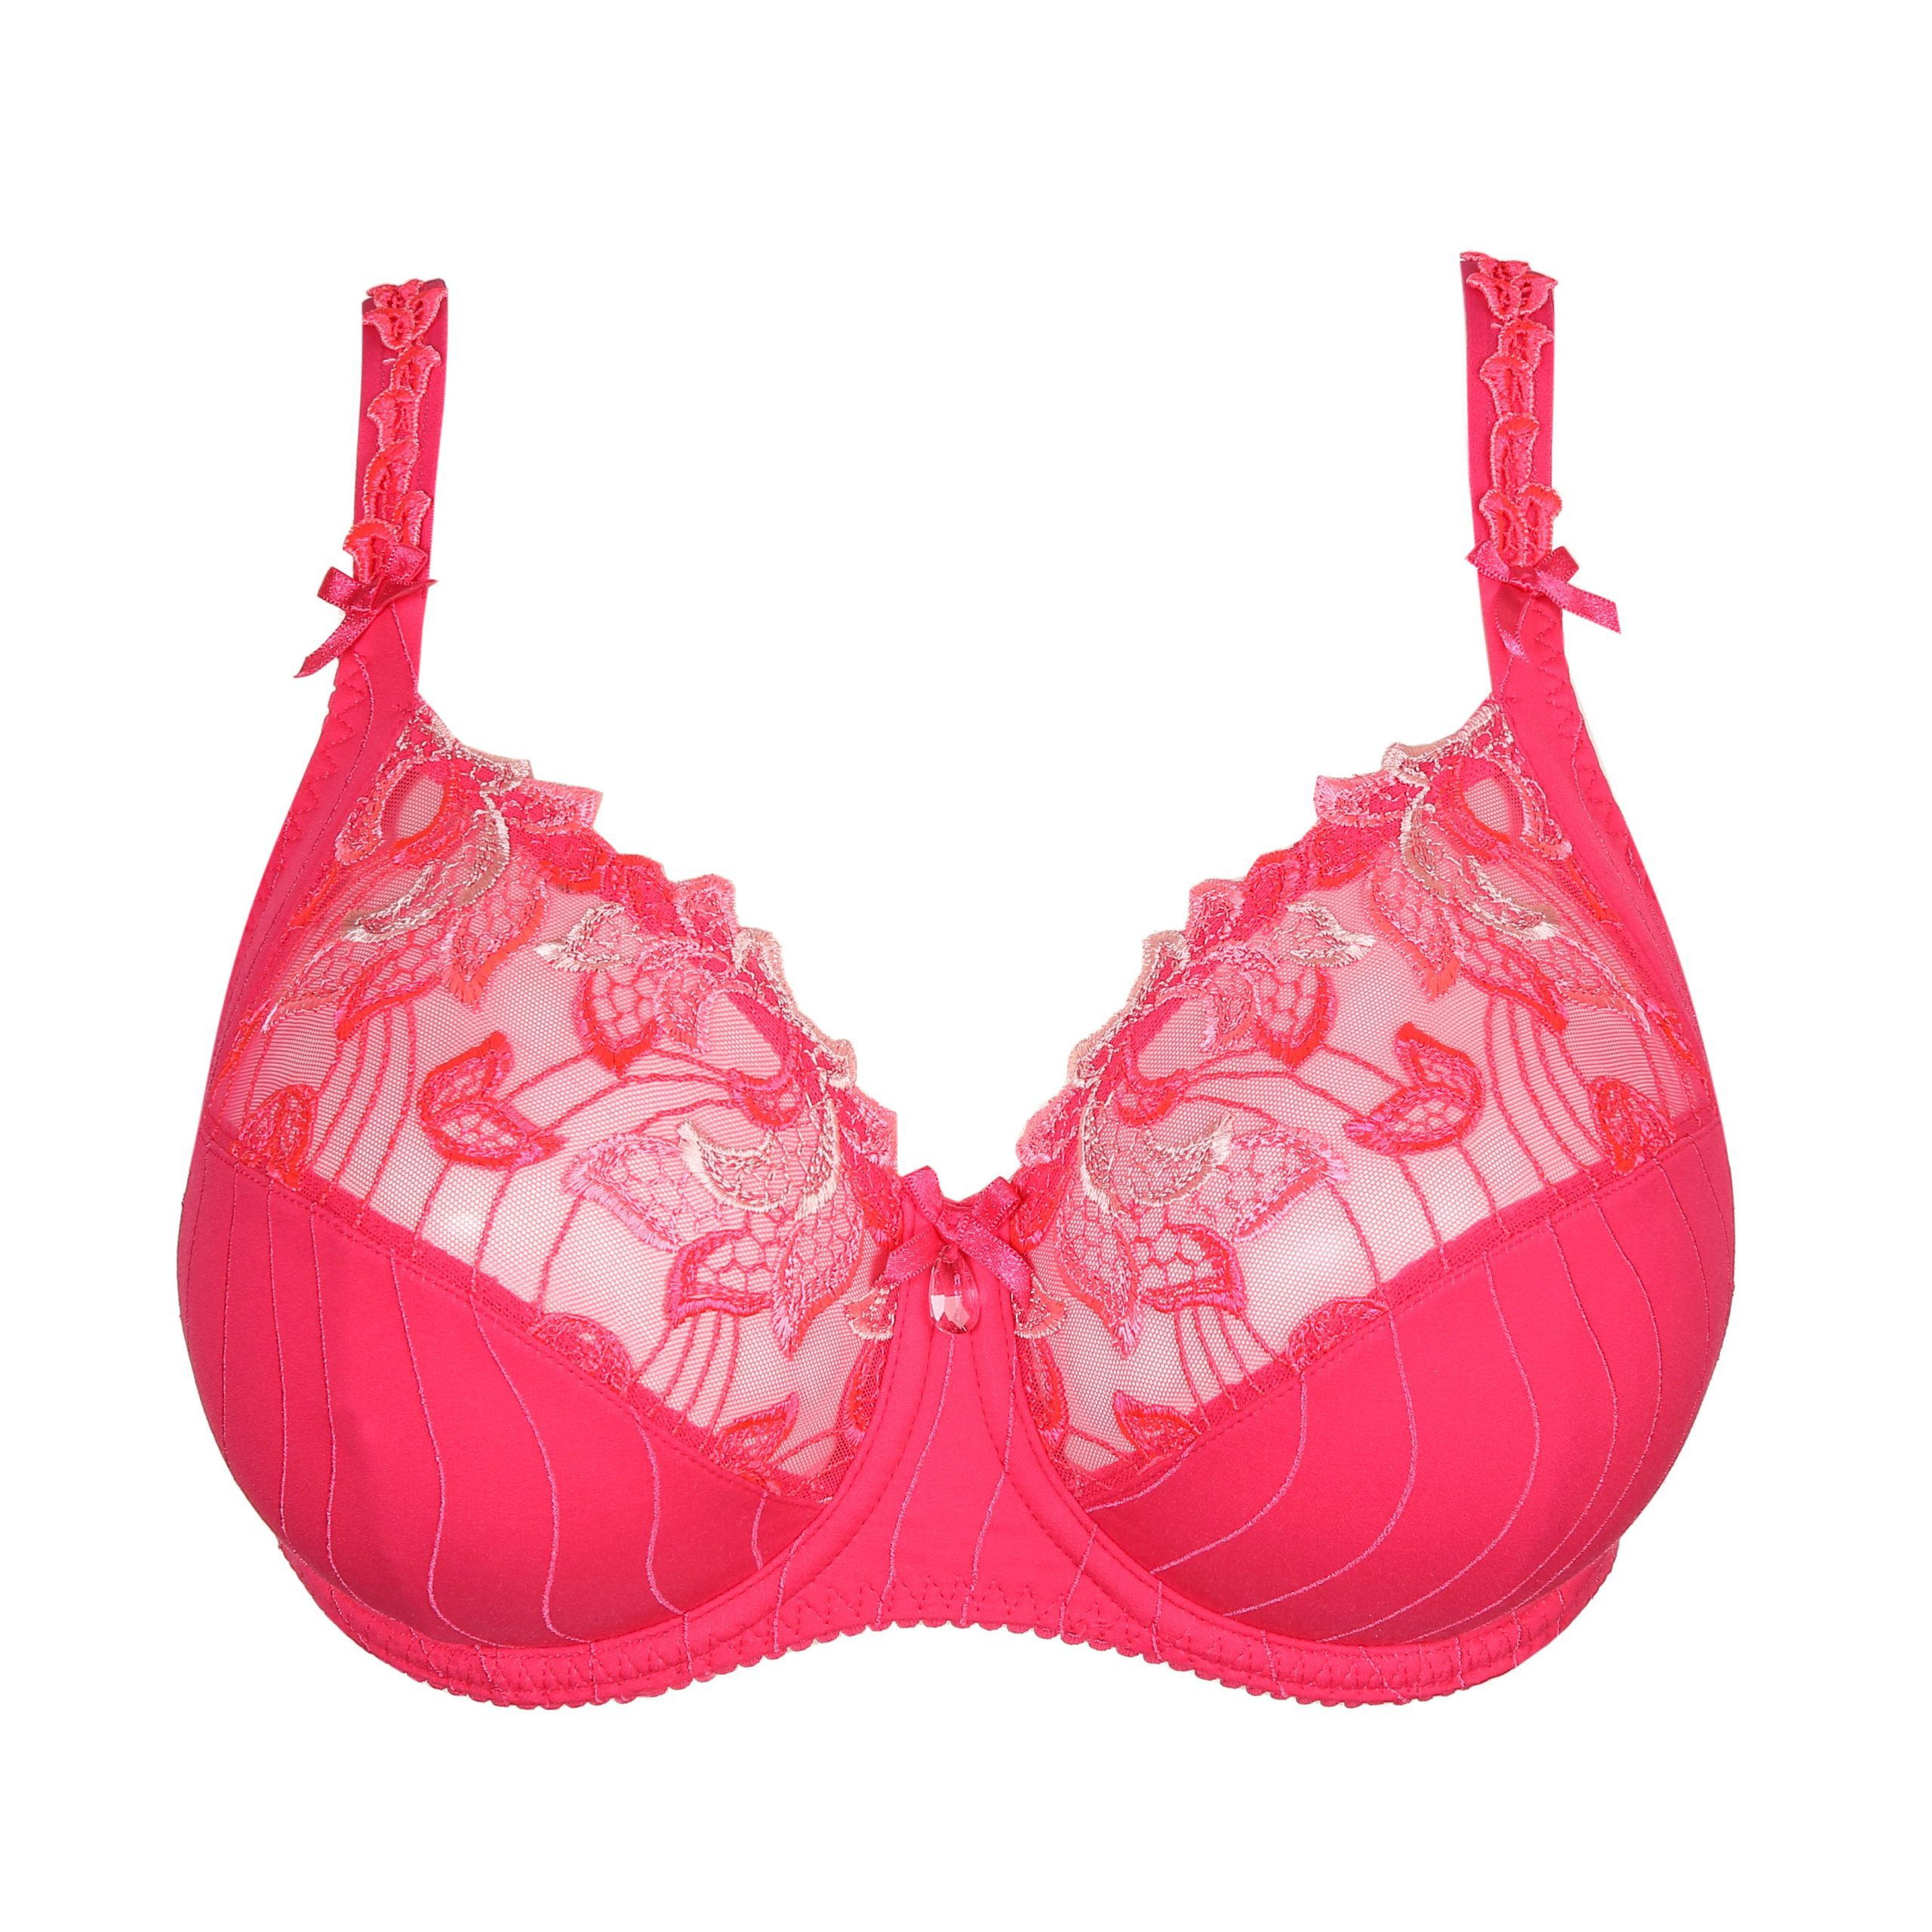 PrimaDonna SATIN natural non padded full cup seamless